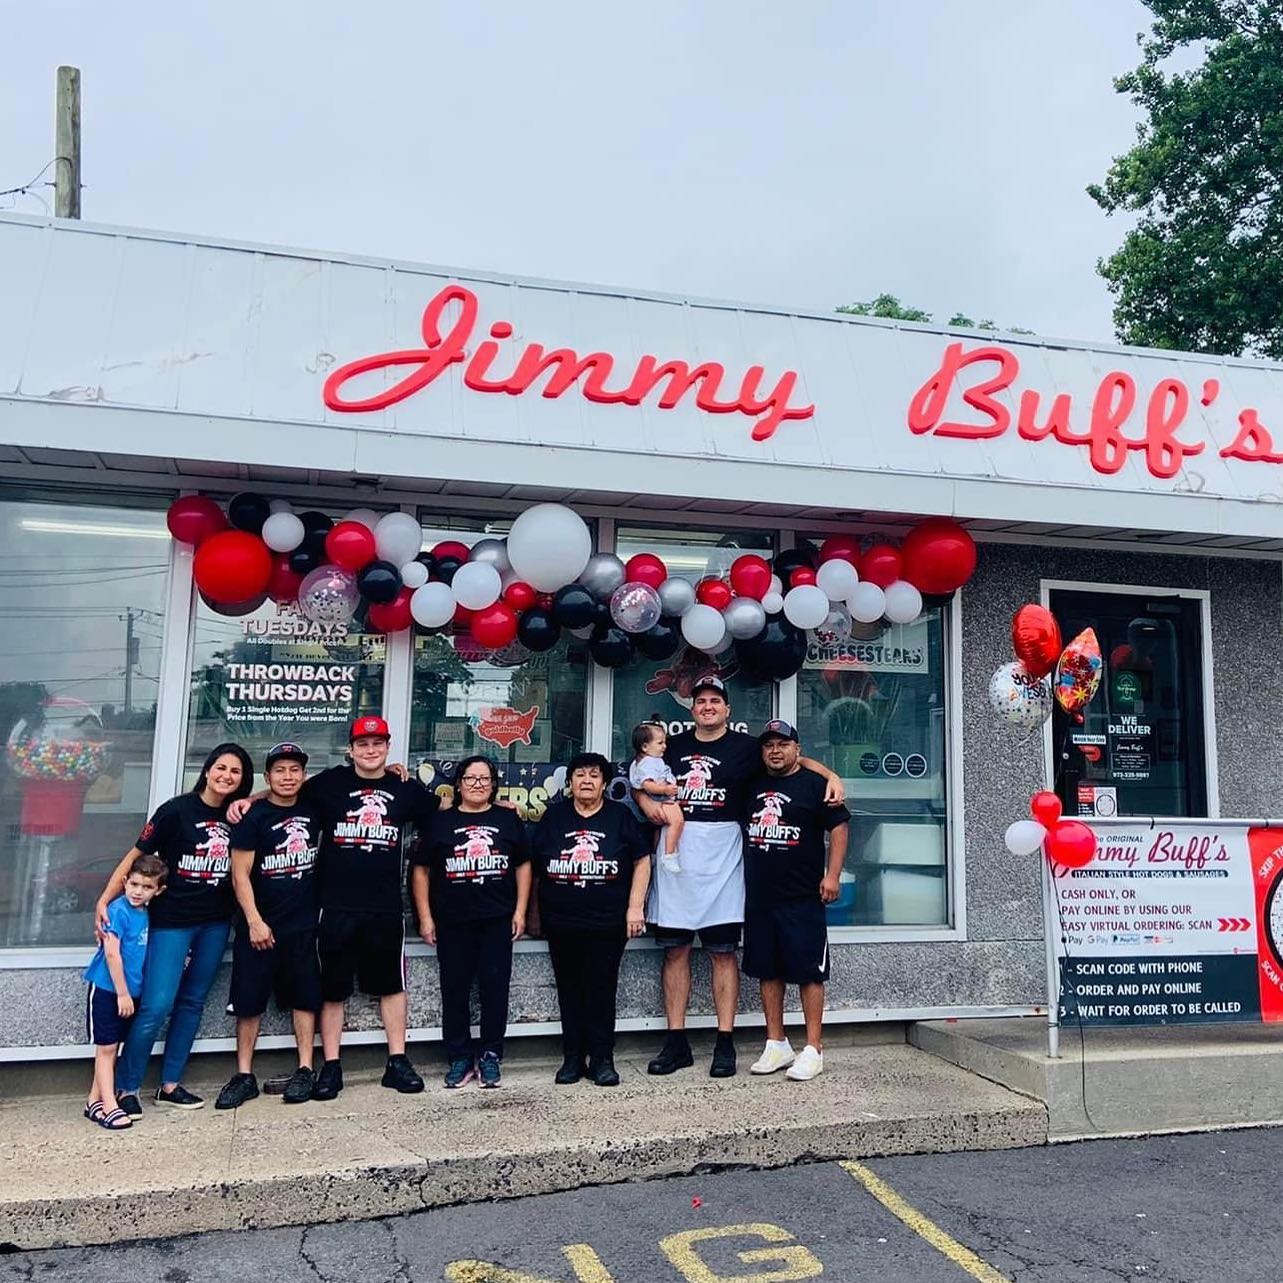 The Jersey Shore's Biggest Weiners Are at Jimmy Buff's